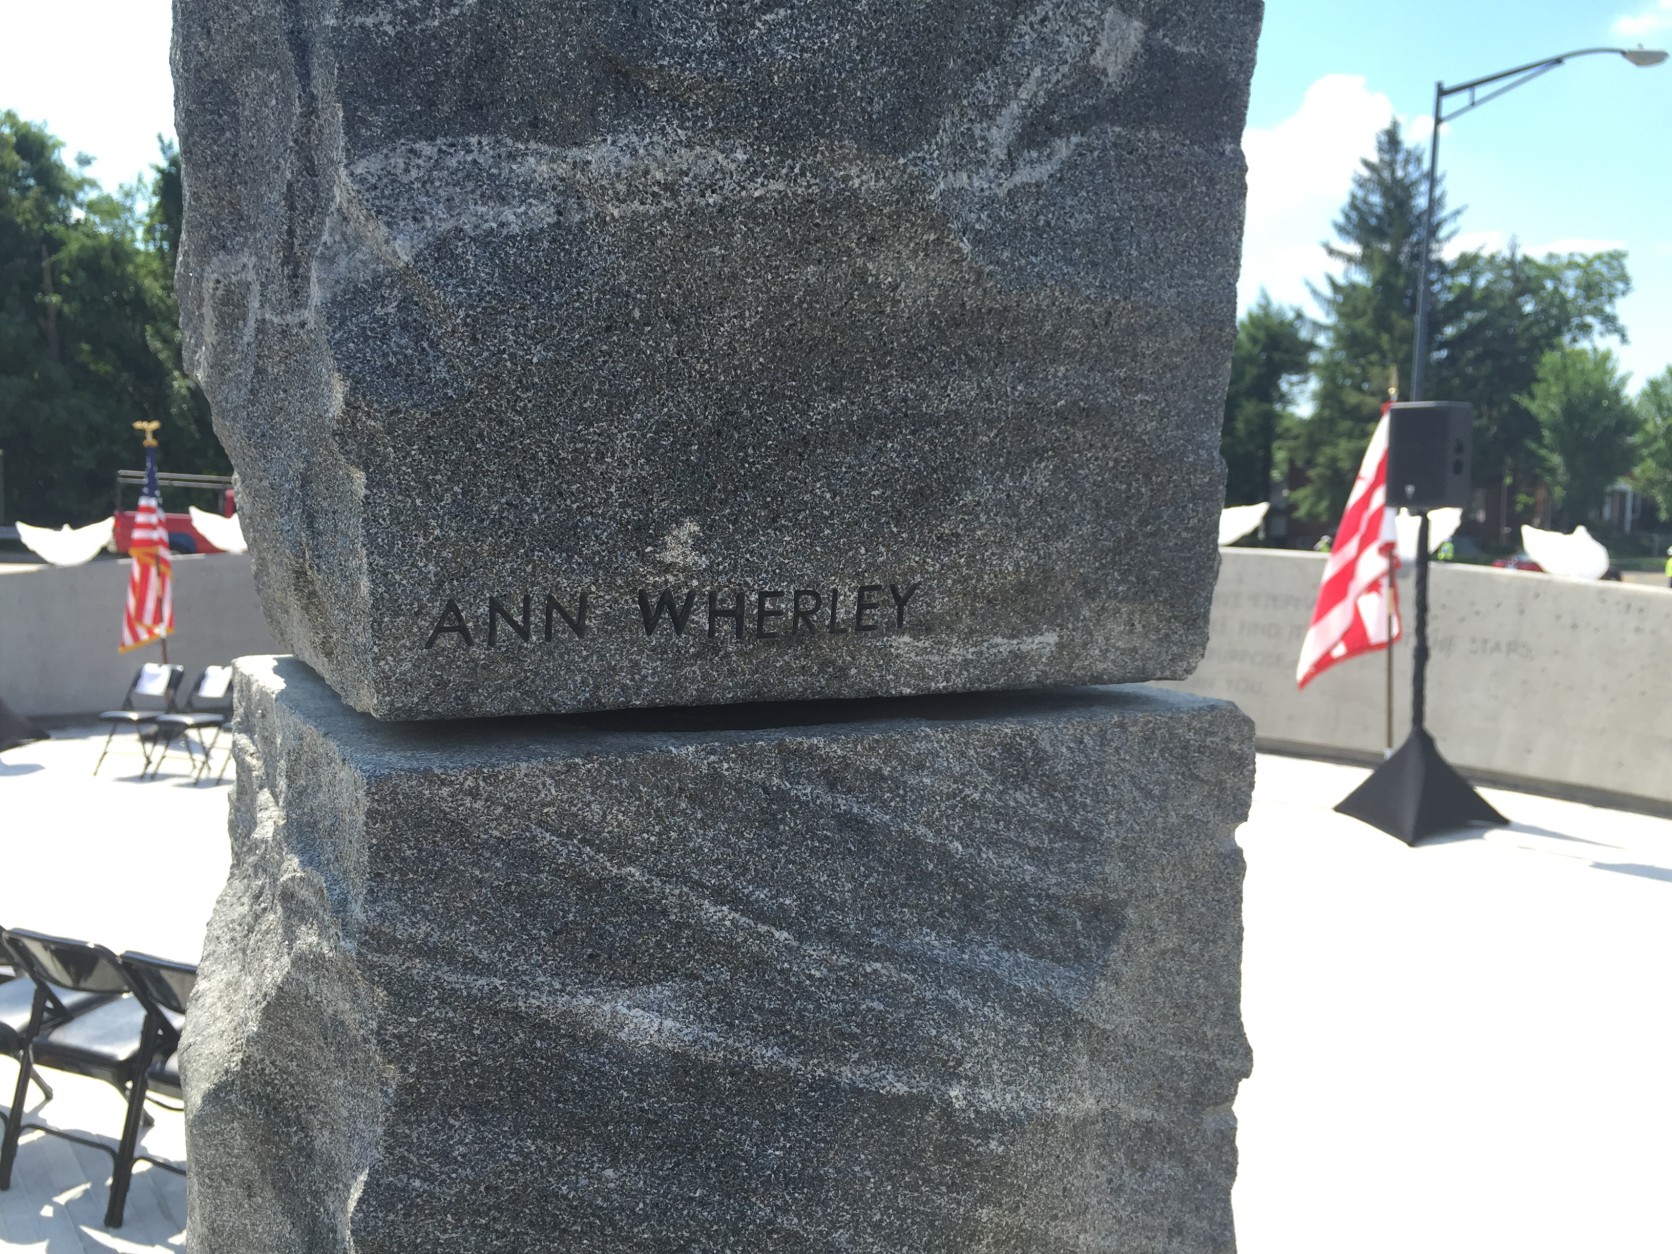 Each stone structure has a name engraved of one of the nine victims. (WTOP/Andrew Mollenbeck)